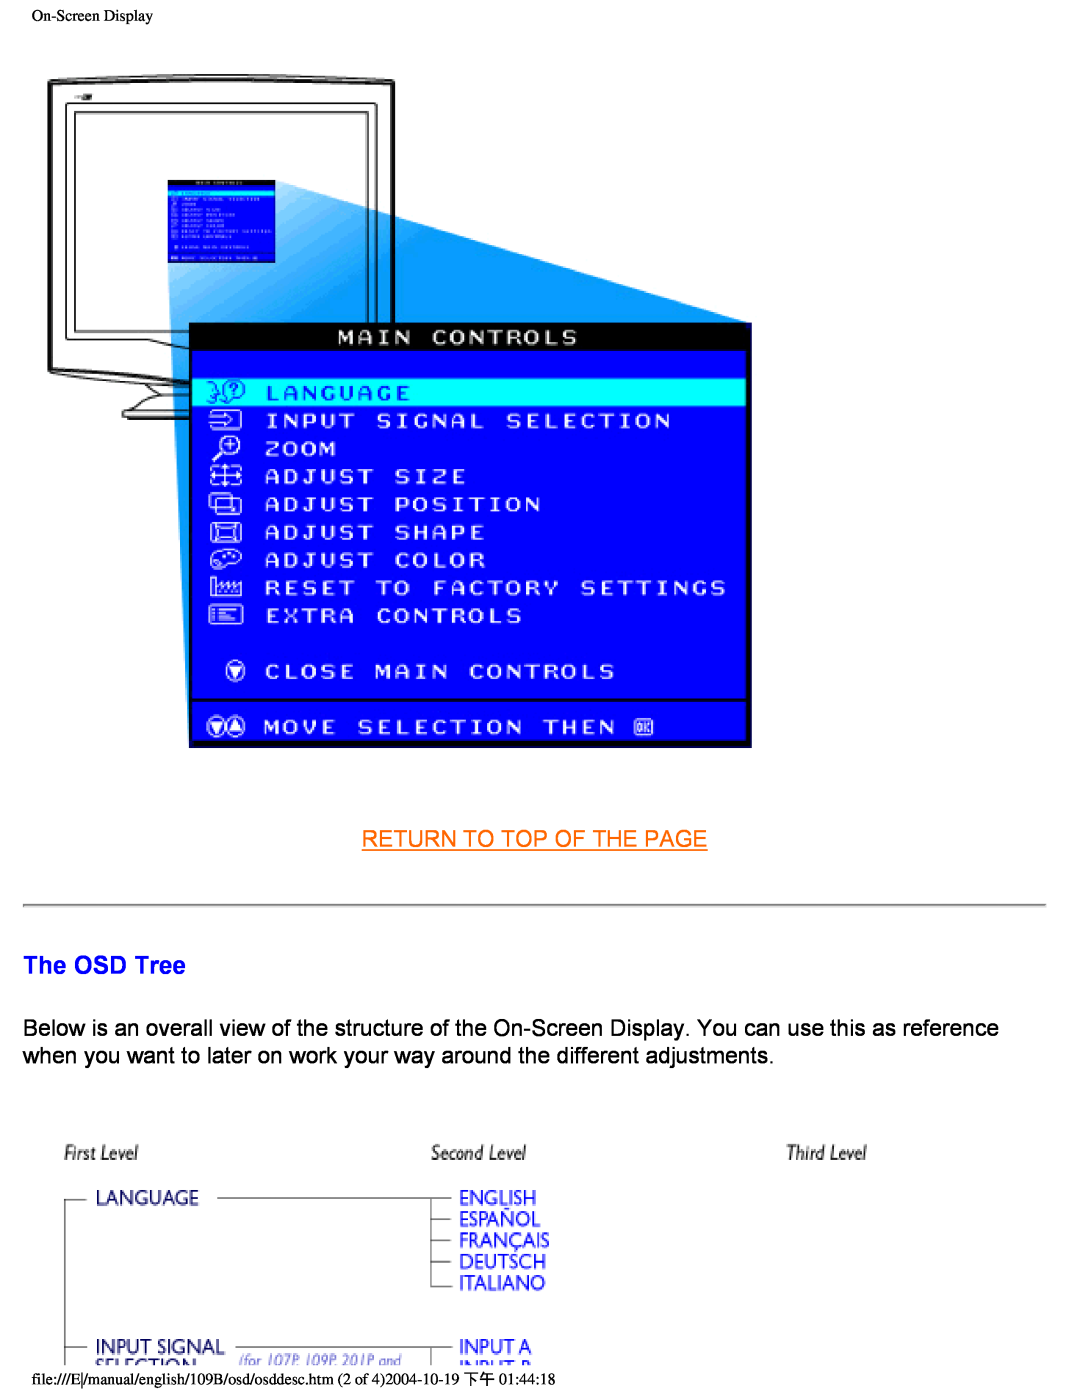 Philips 109B user manual The OSD Tree, Return To Top Of The Page, On-Screen Display 